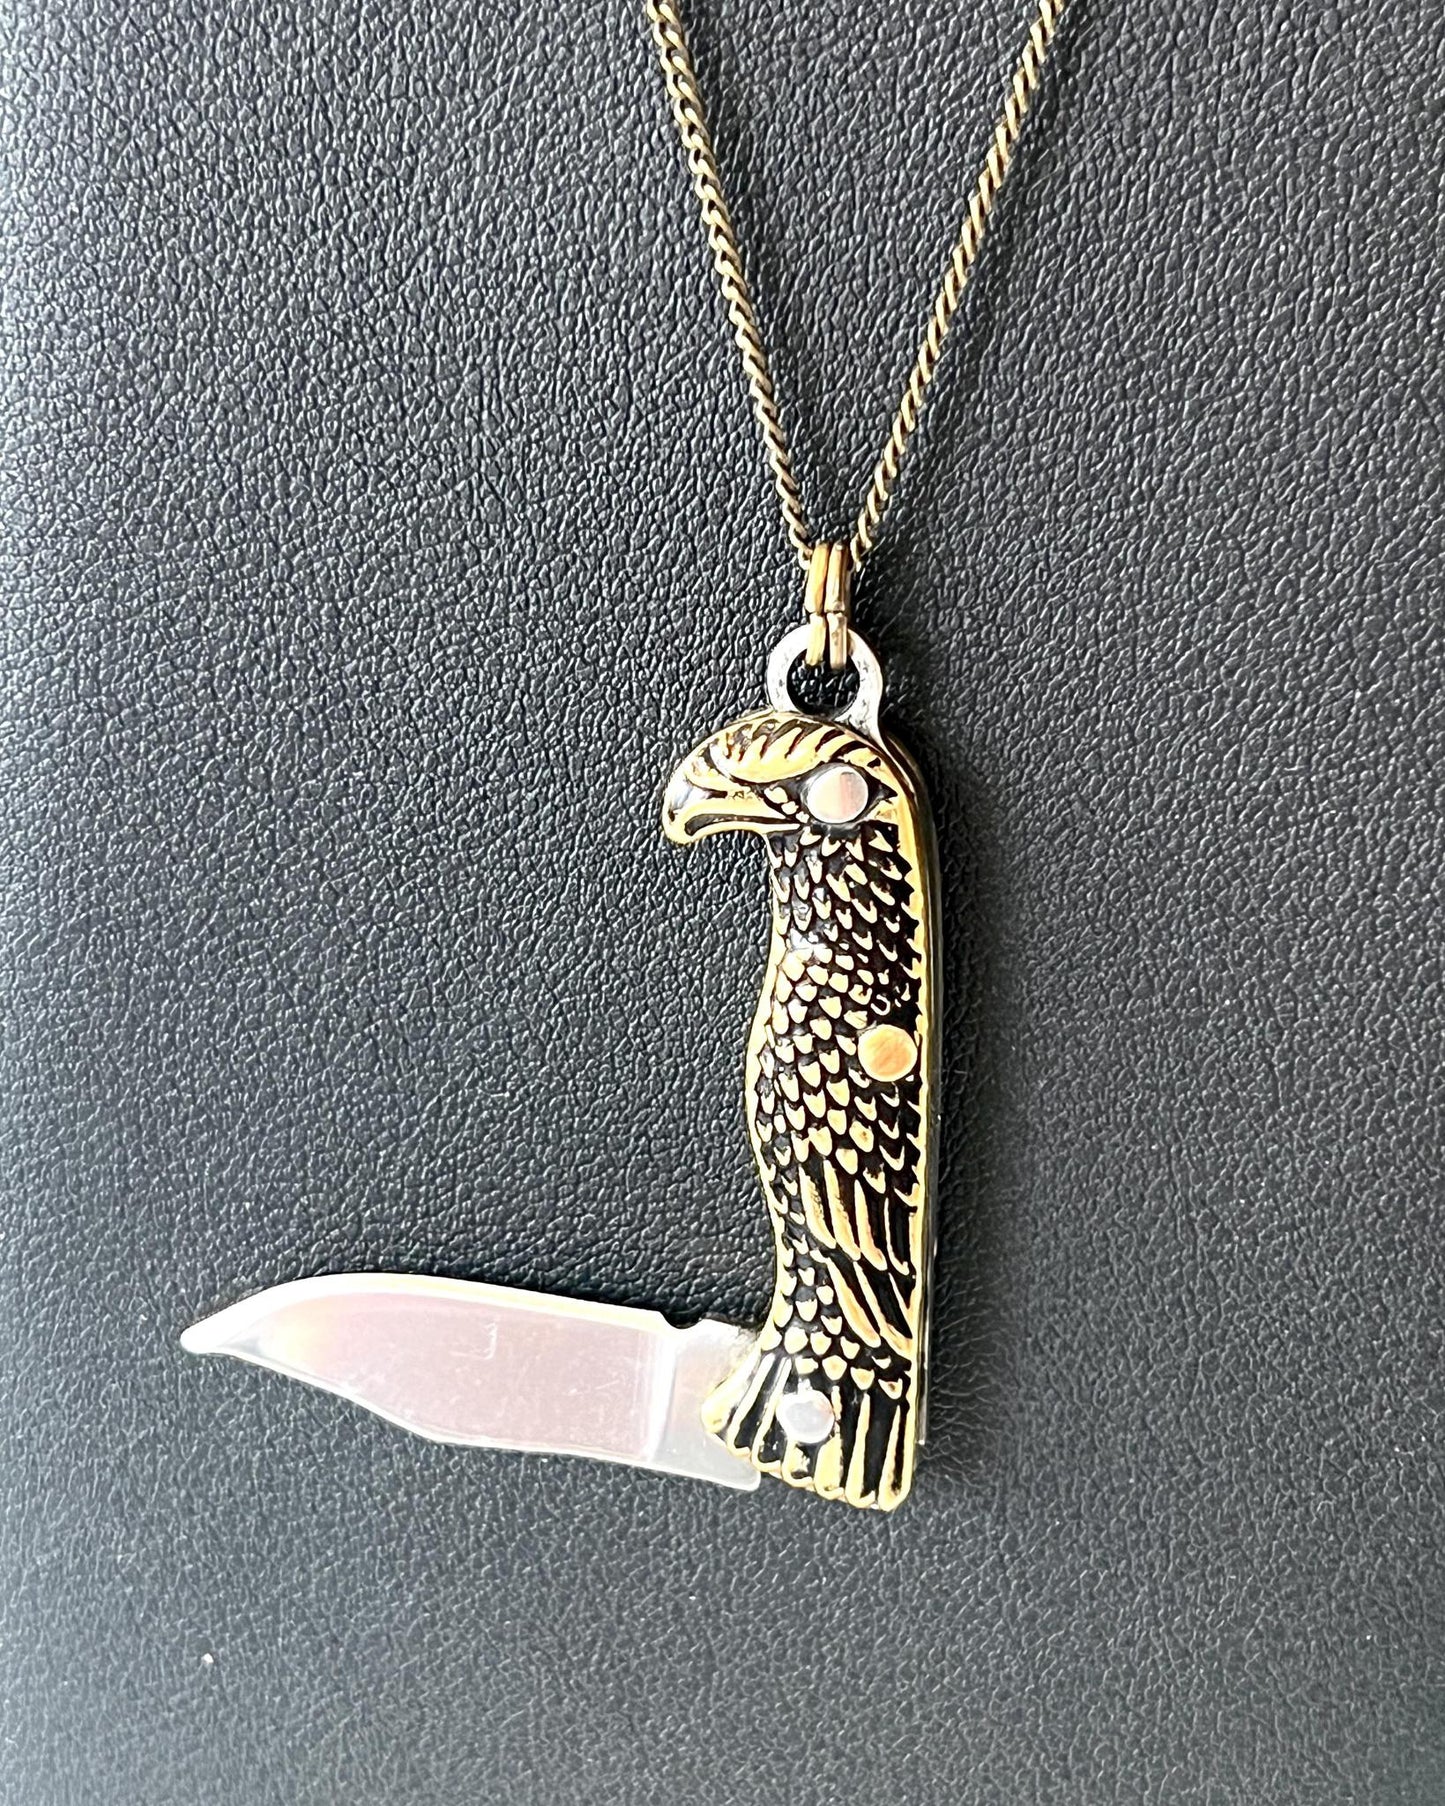 1979 Jewelry Knife Necklace 1.5 inch Eagle